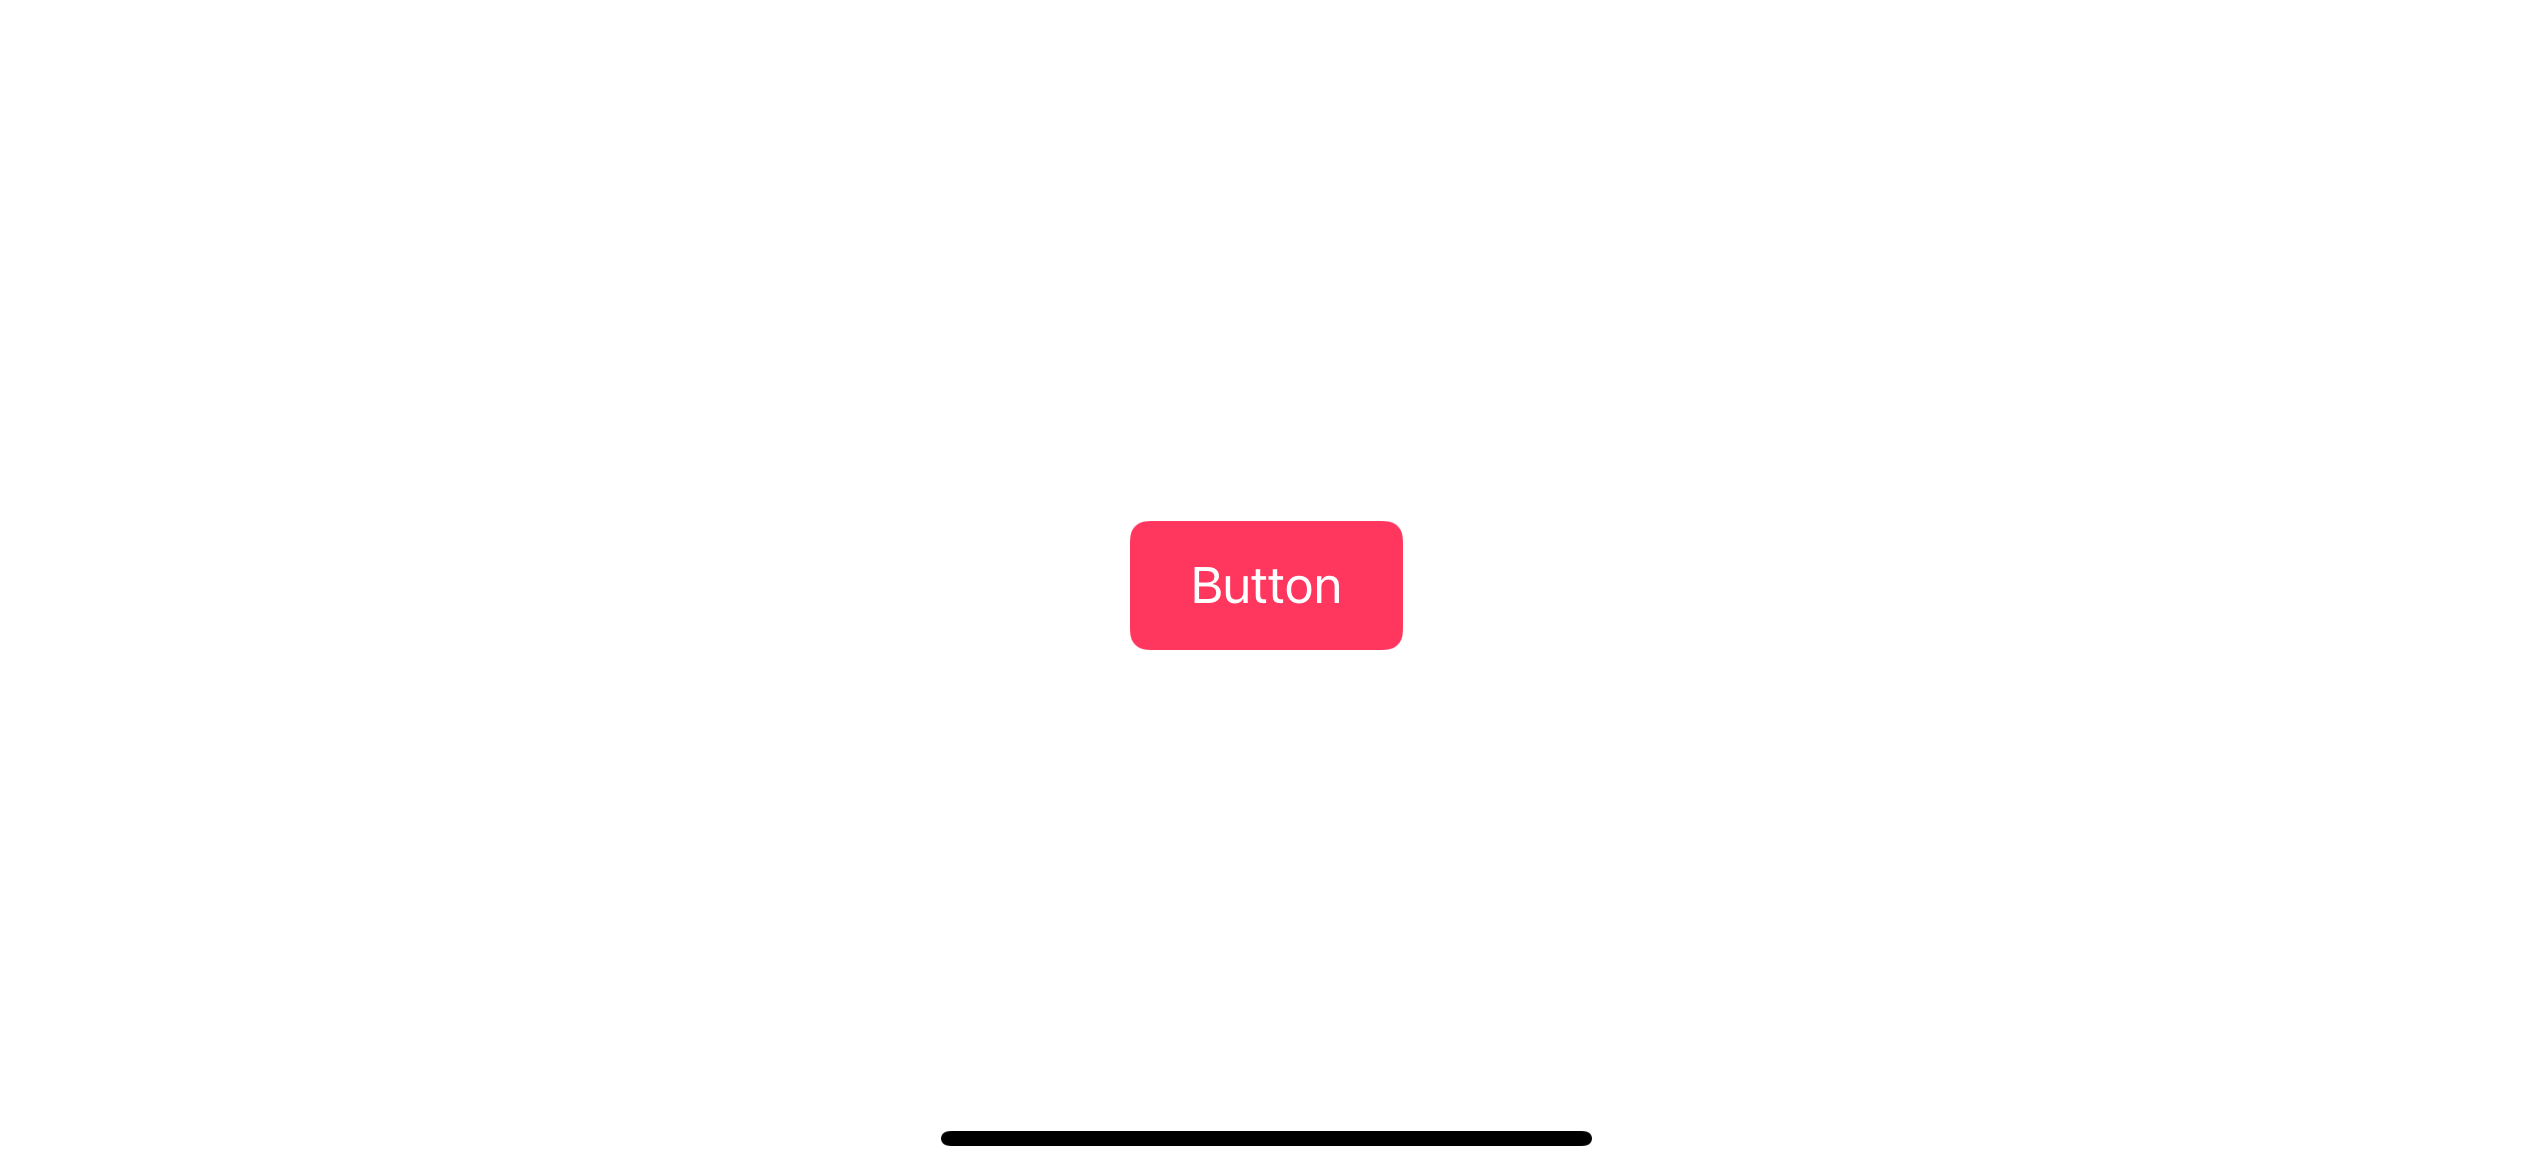 Filled button style